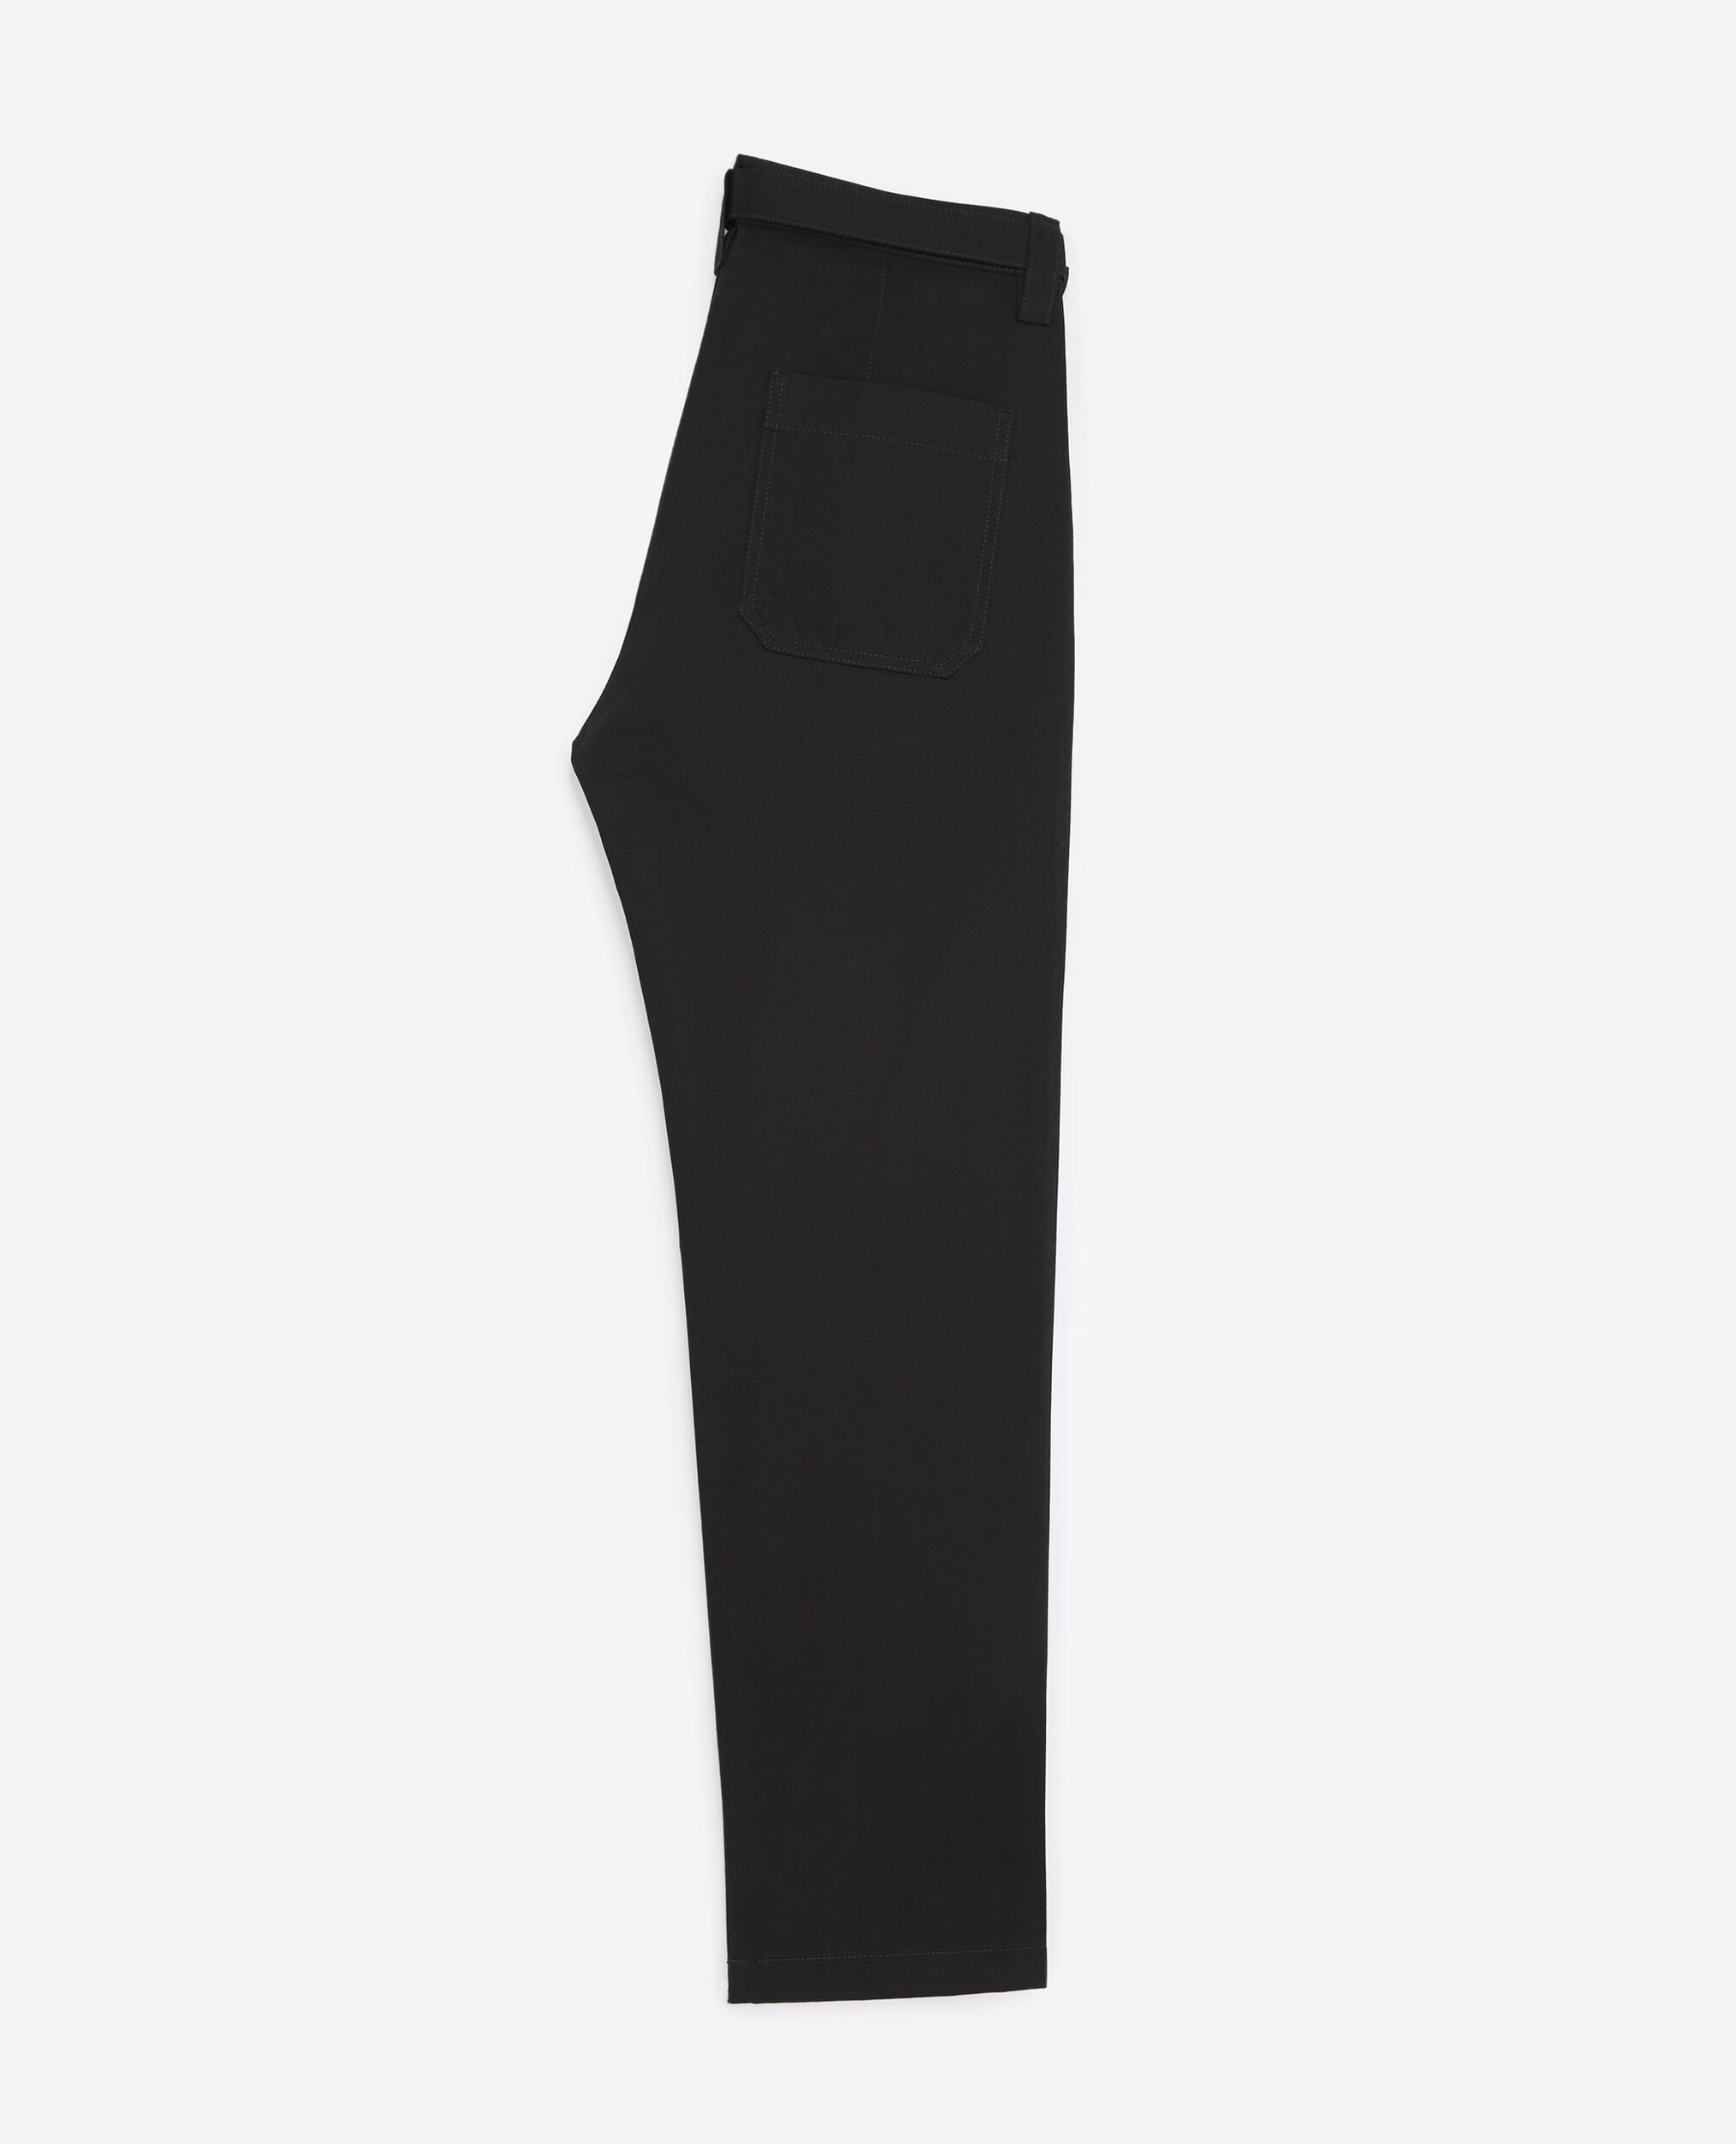 Straight-cut black trousers with belt, BLACK, hi-res image number null